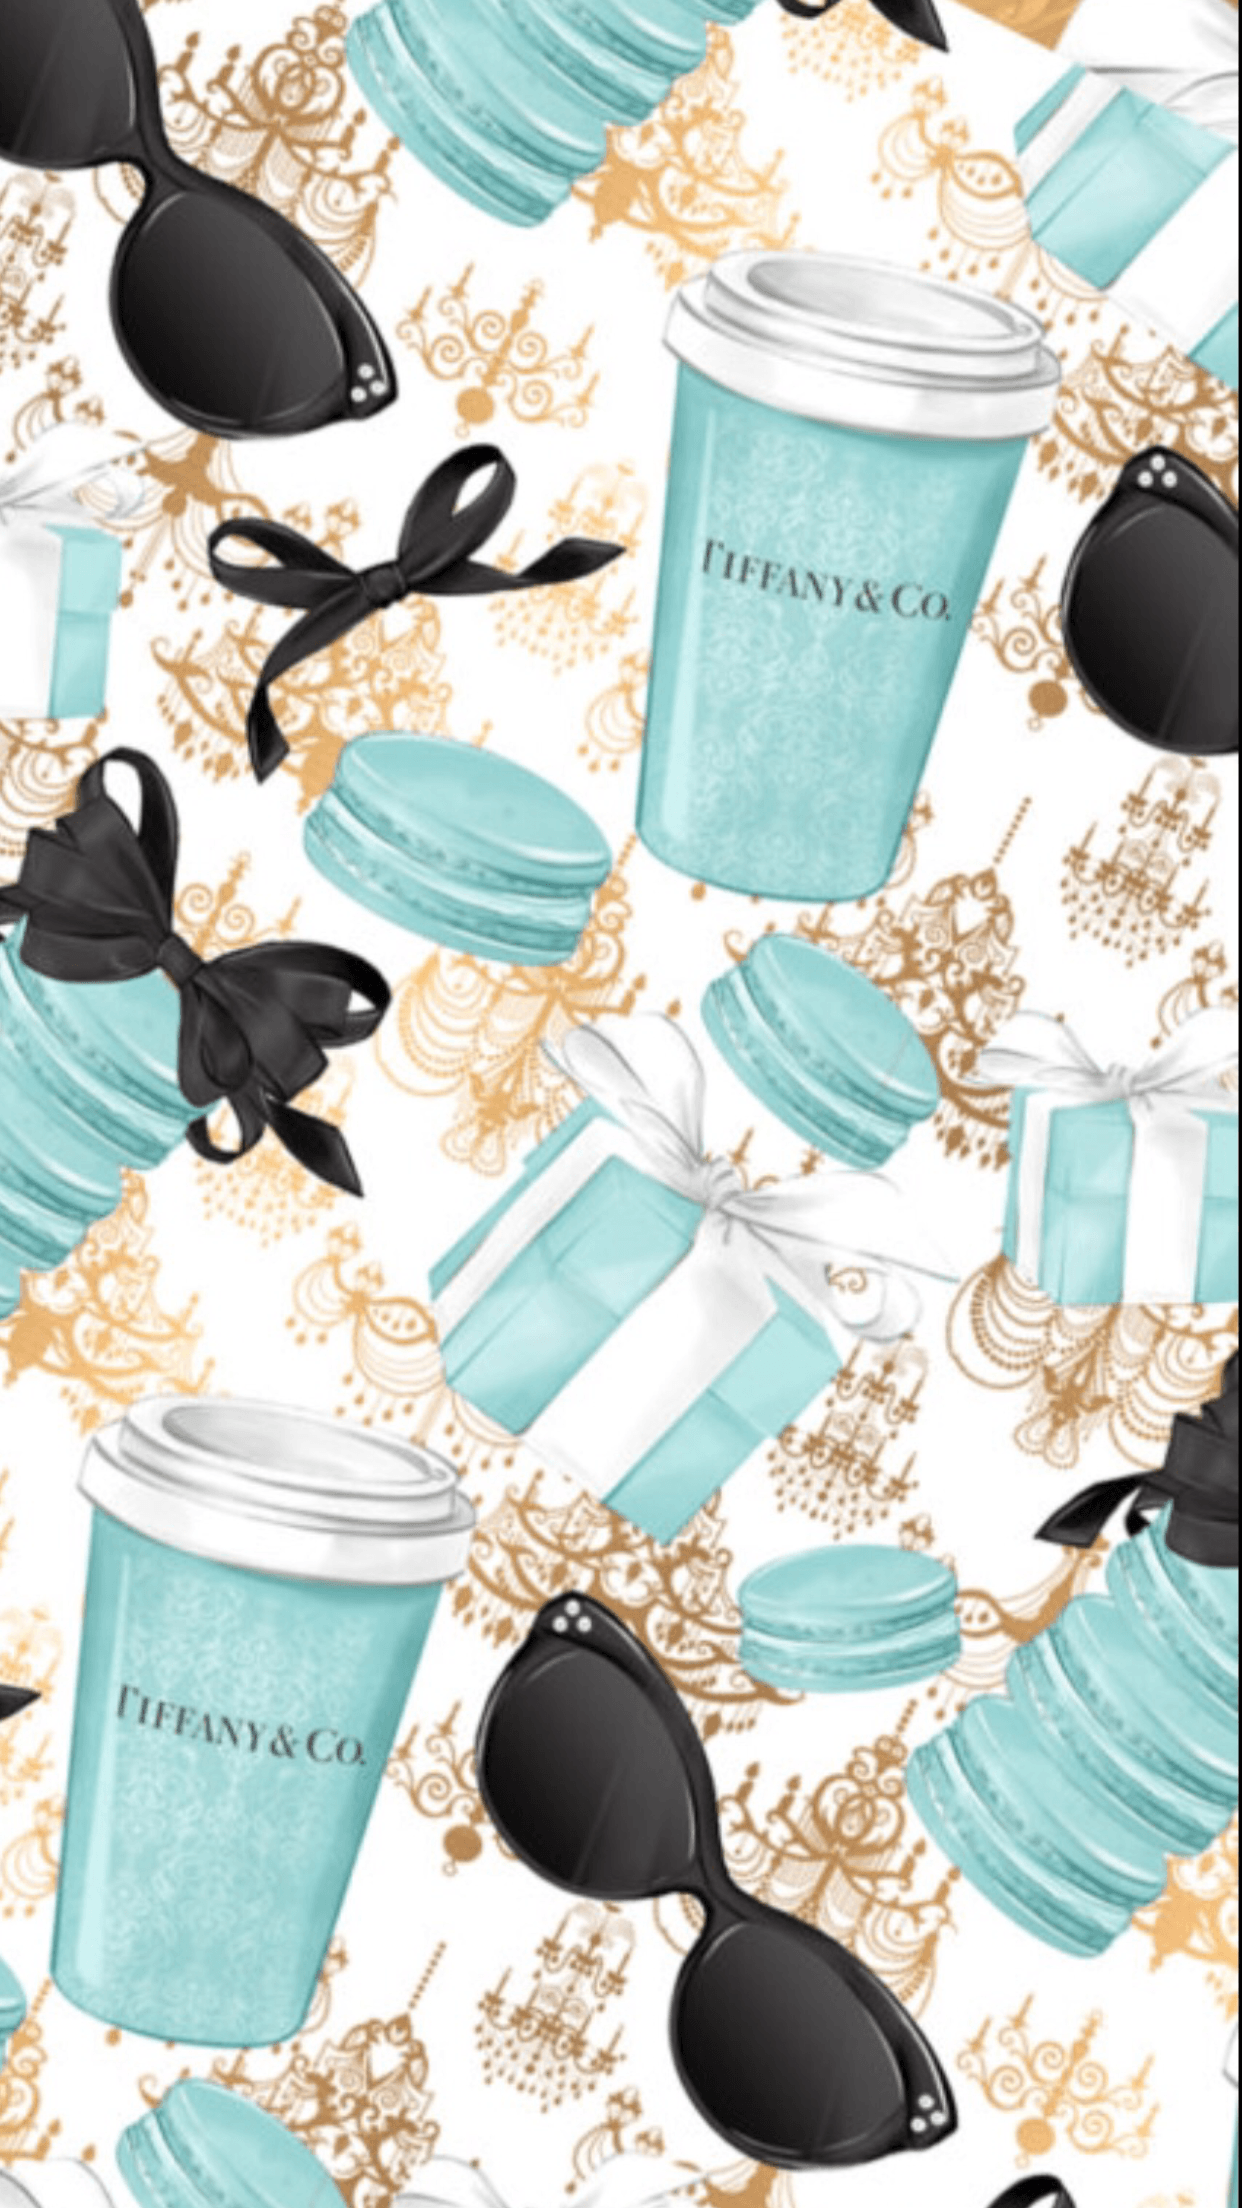 Tiffany & Co. Wallpapers - Wallpaper Cave